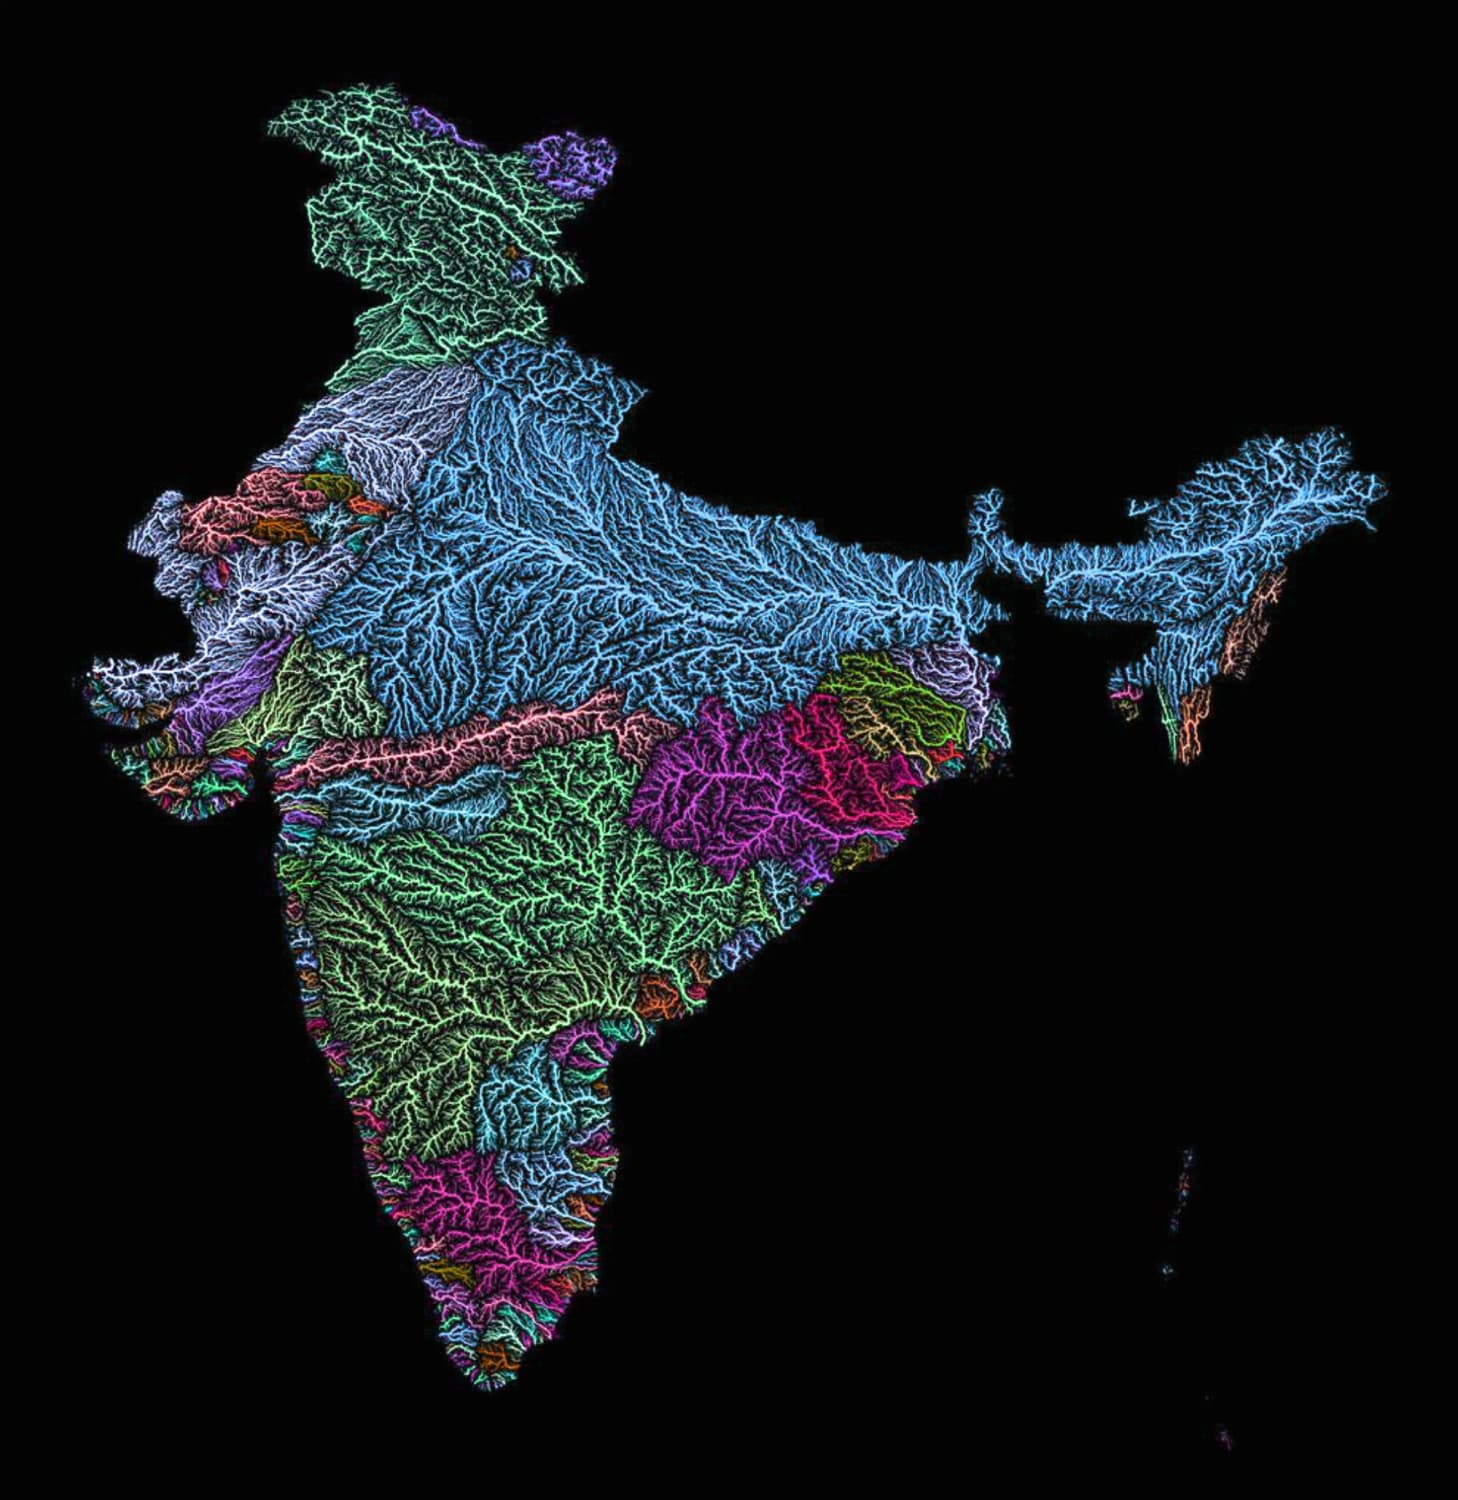 Watershed Map of India